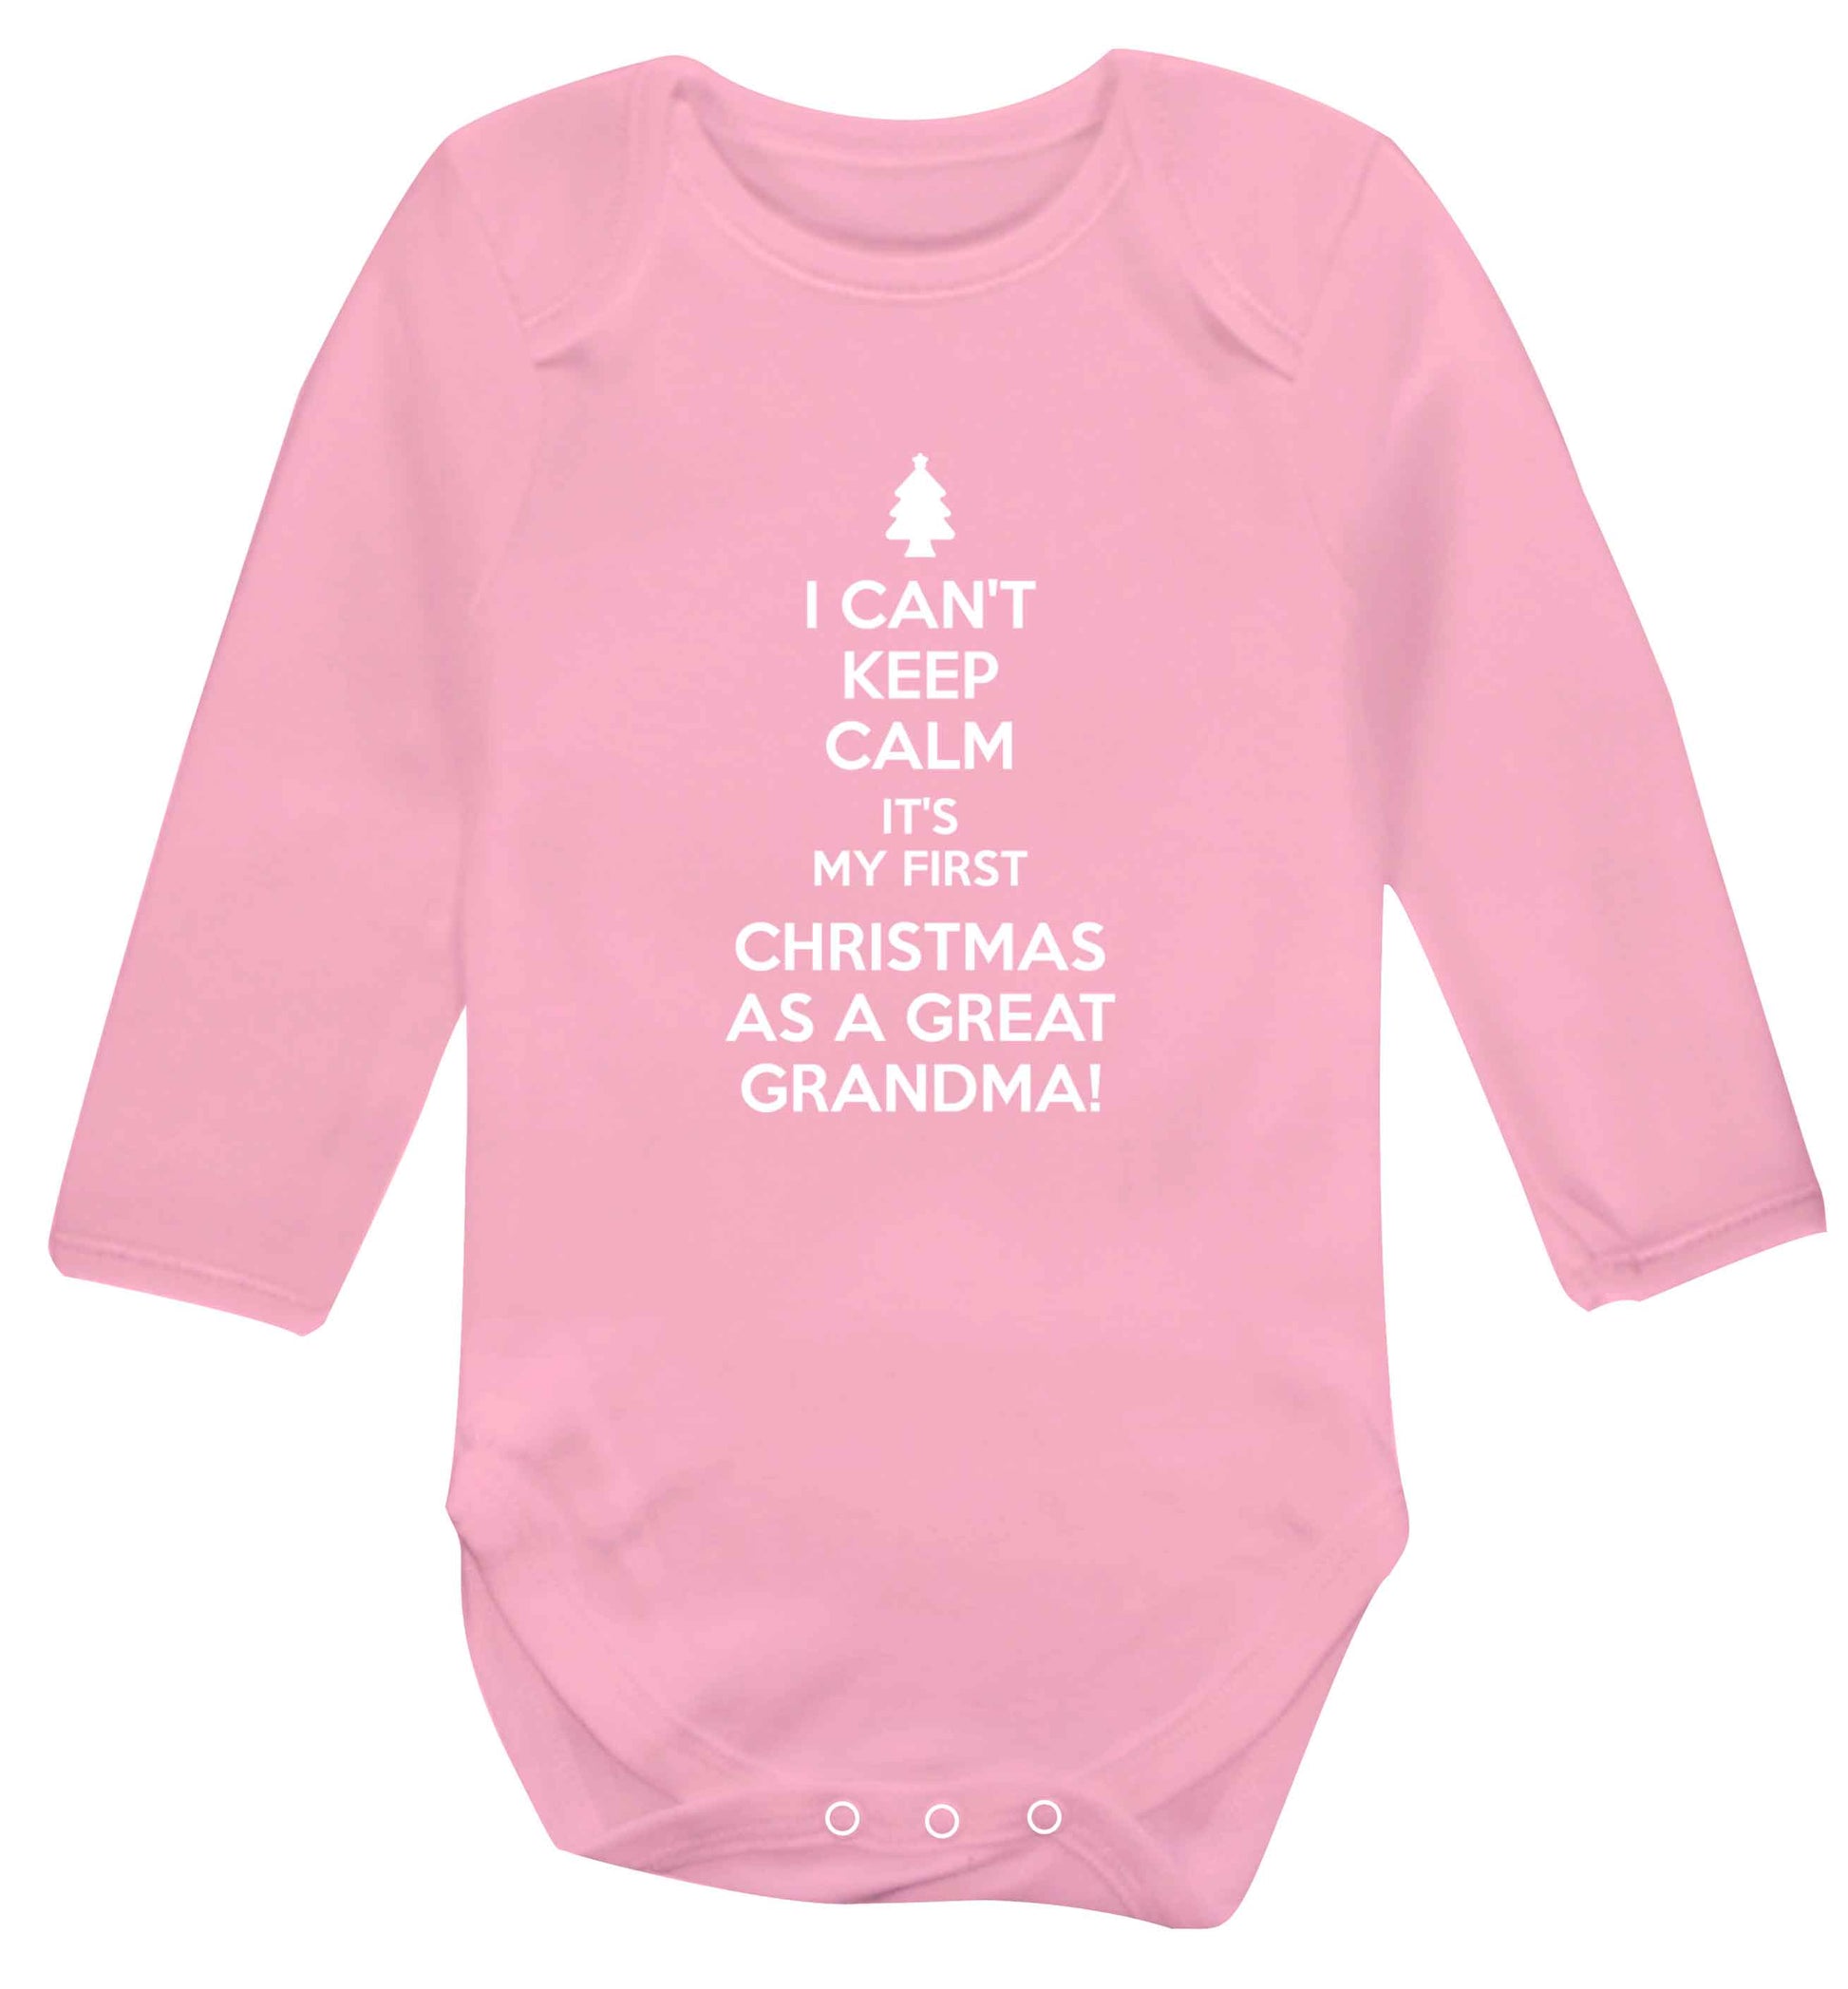 I can't keep calm it's my first Christmas as a great grandma! Baby Vest long sleeved pale pink 6-12 months